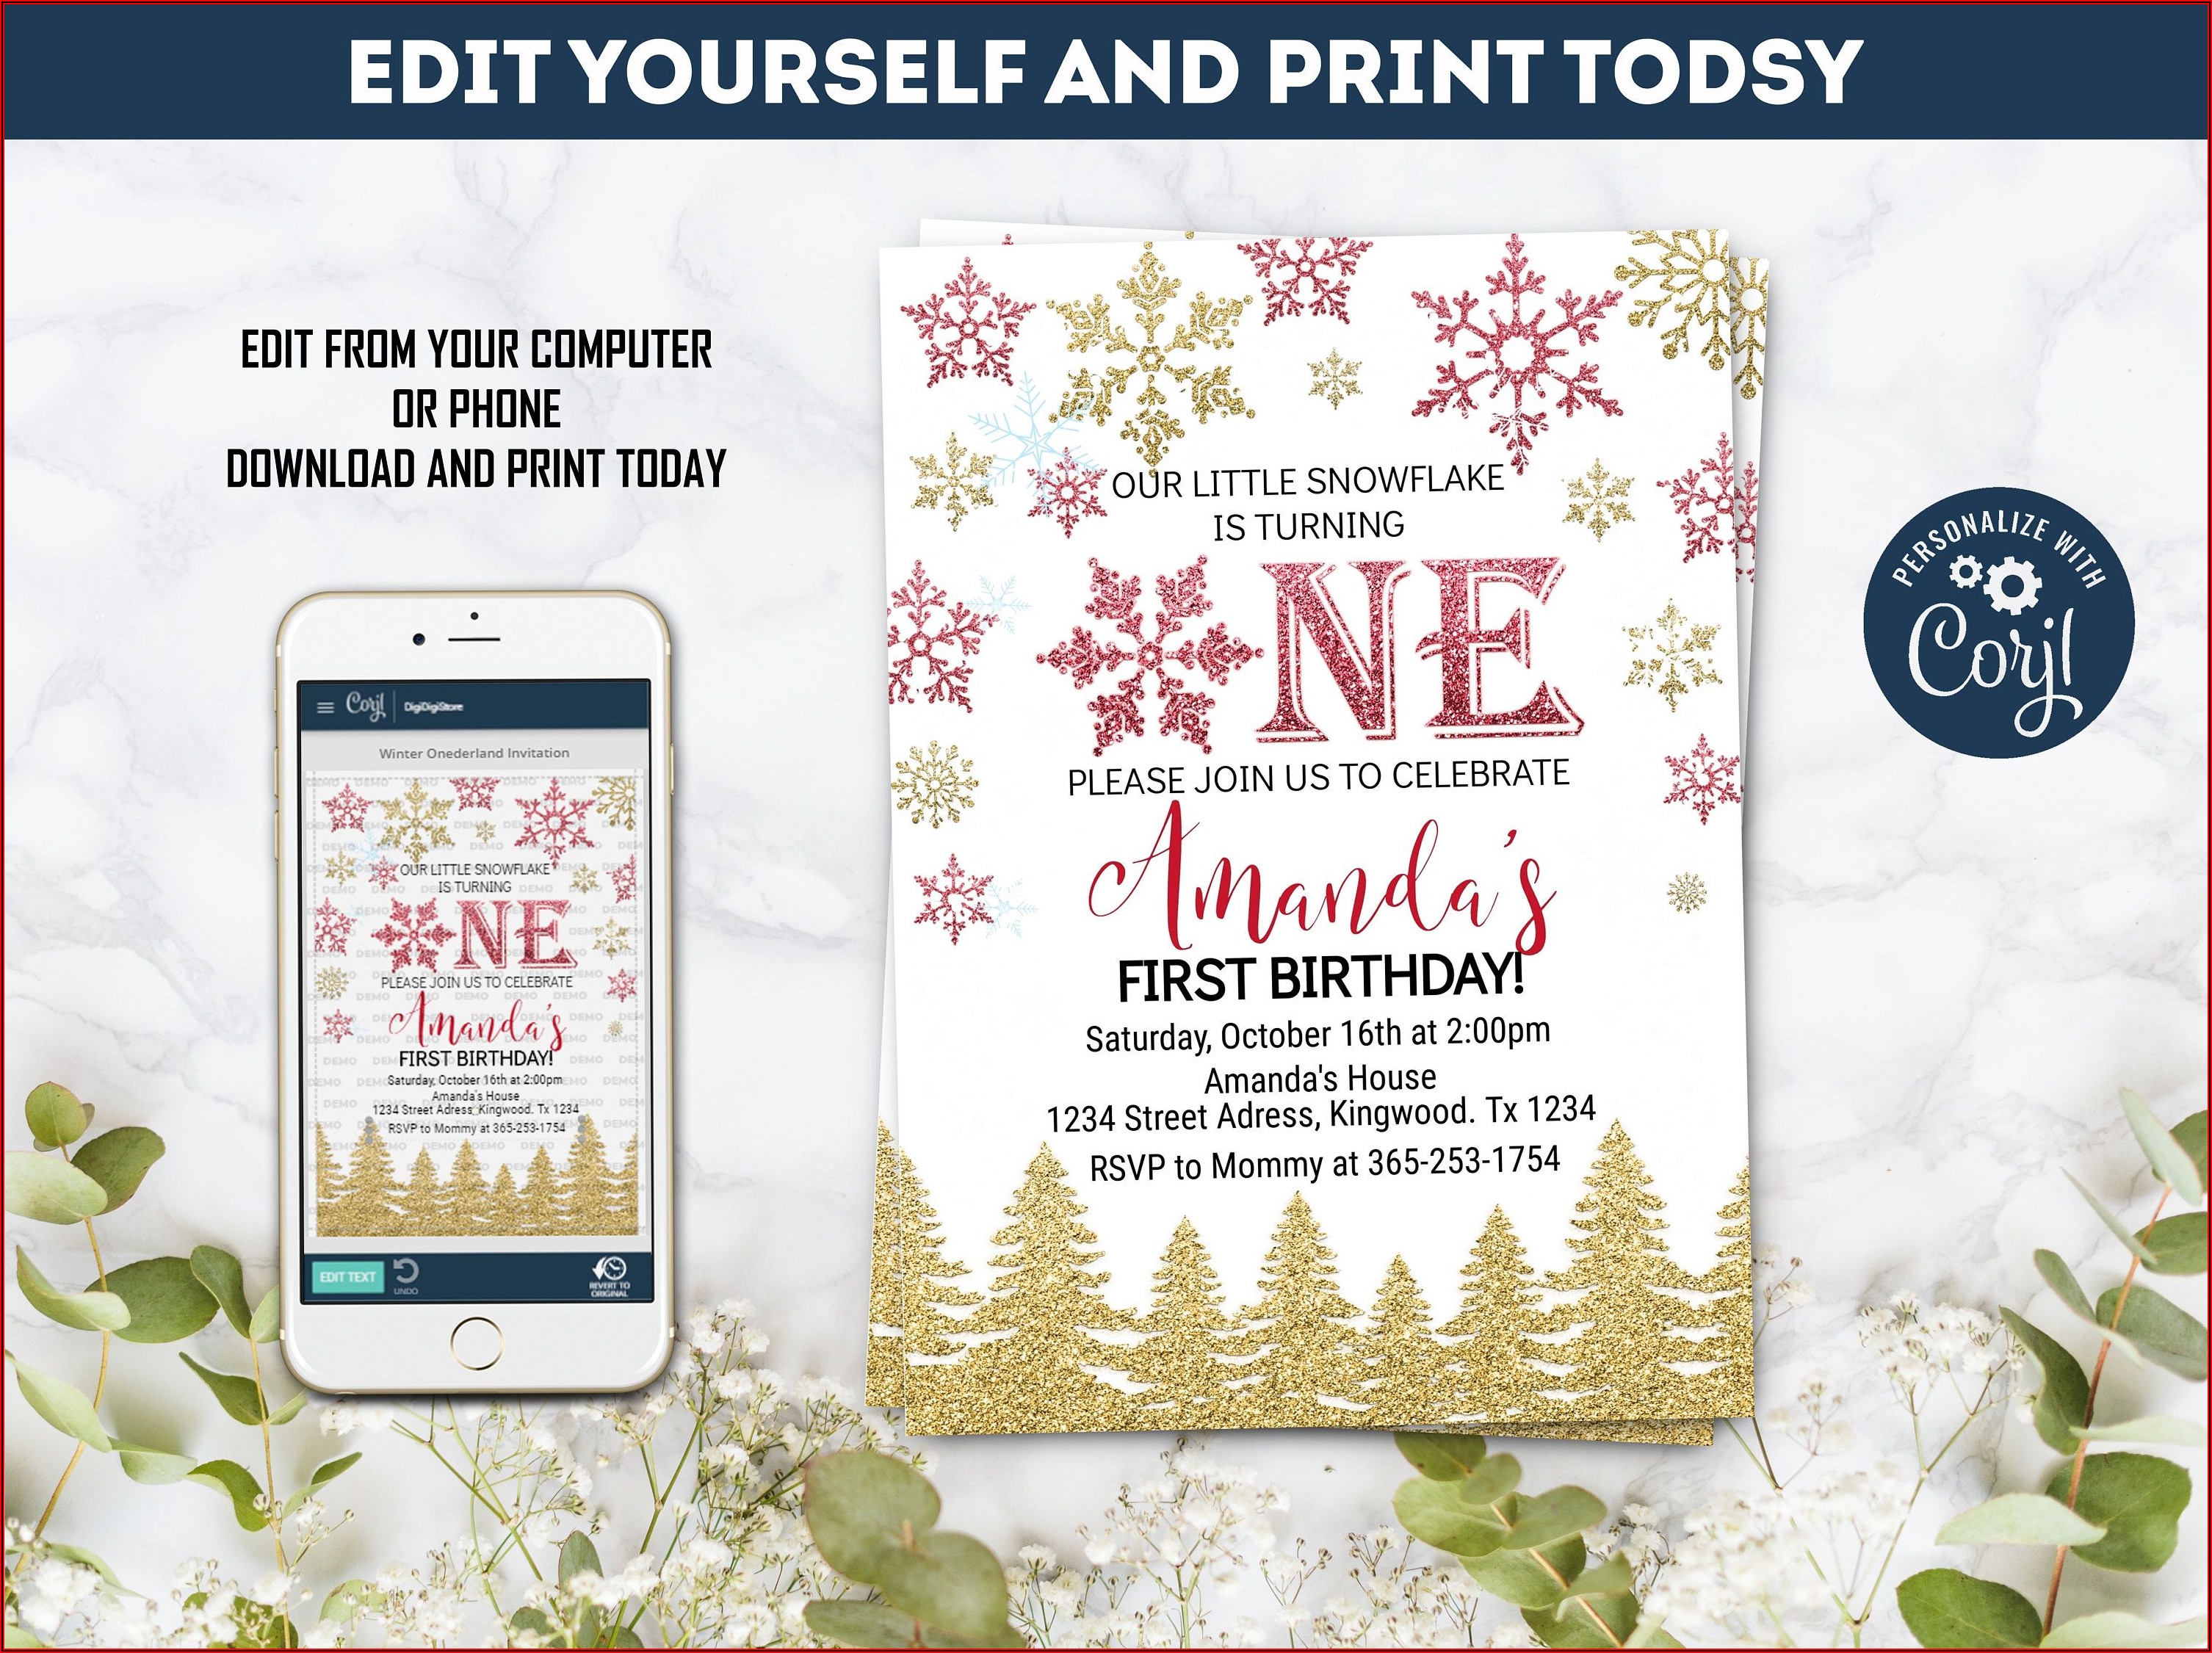 Winter Onederland Party Invitation Template